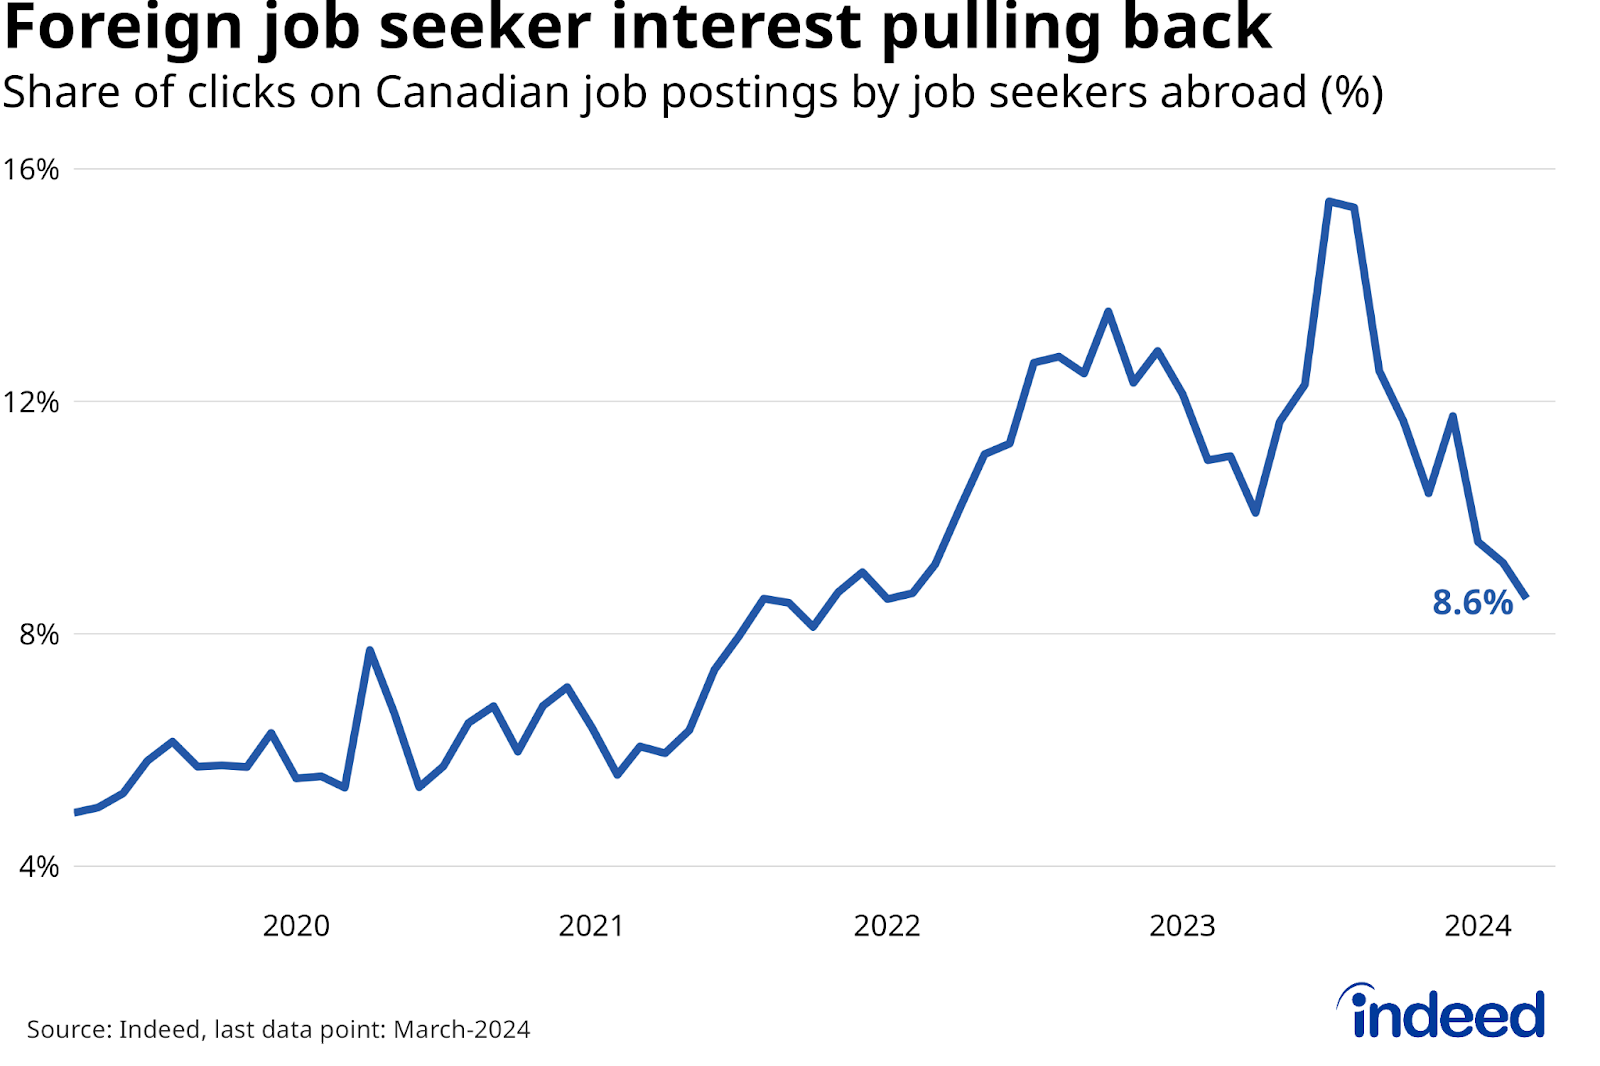 Line chart titled: “Foreign job seeker interest pulling back” shows the share of clicks on Canadian job postings by job seekers located abroad between January 2019 and March 2024. The foreign click-share rose from 6.5% to over 14% between 2021 and mid-2023, but has dropped since, standing at 8.6% in March 2024.